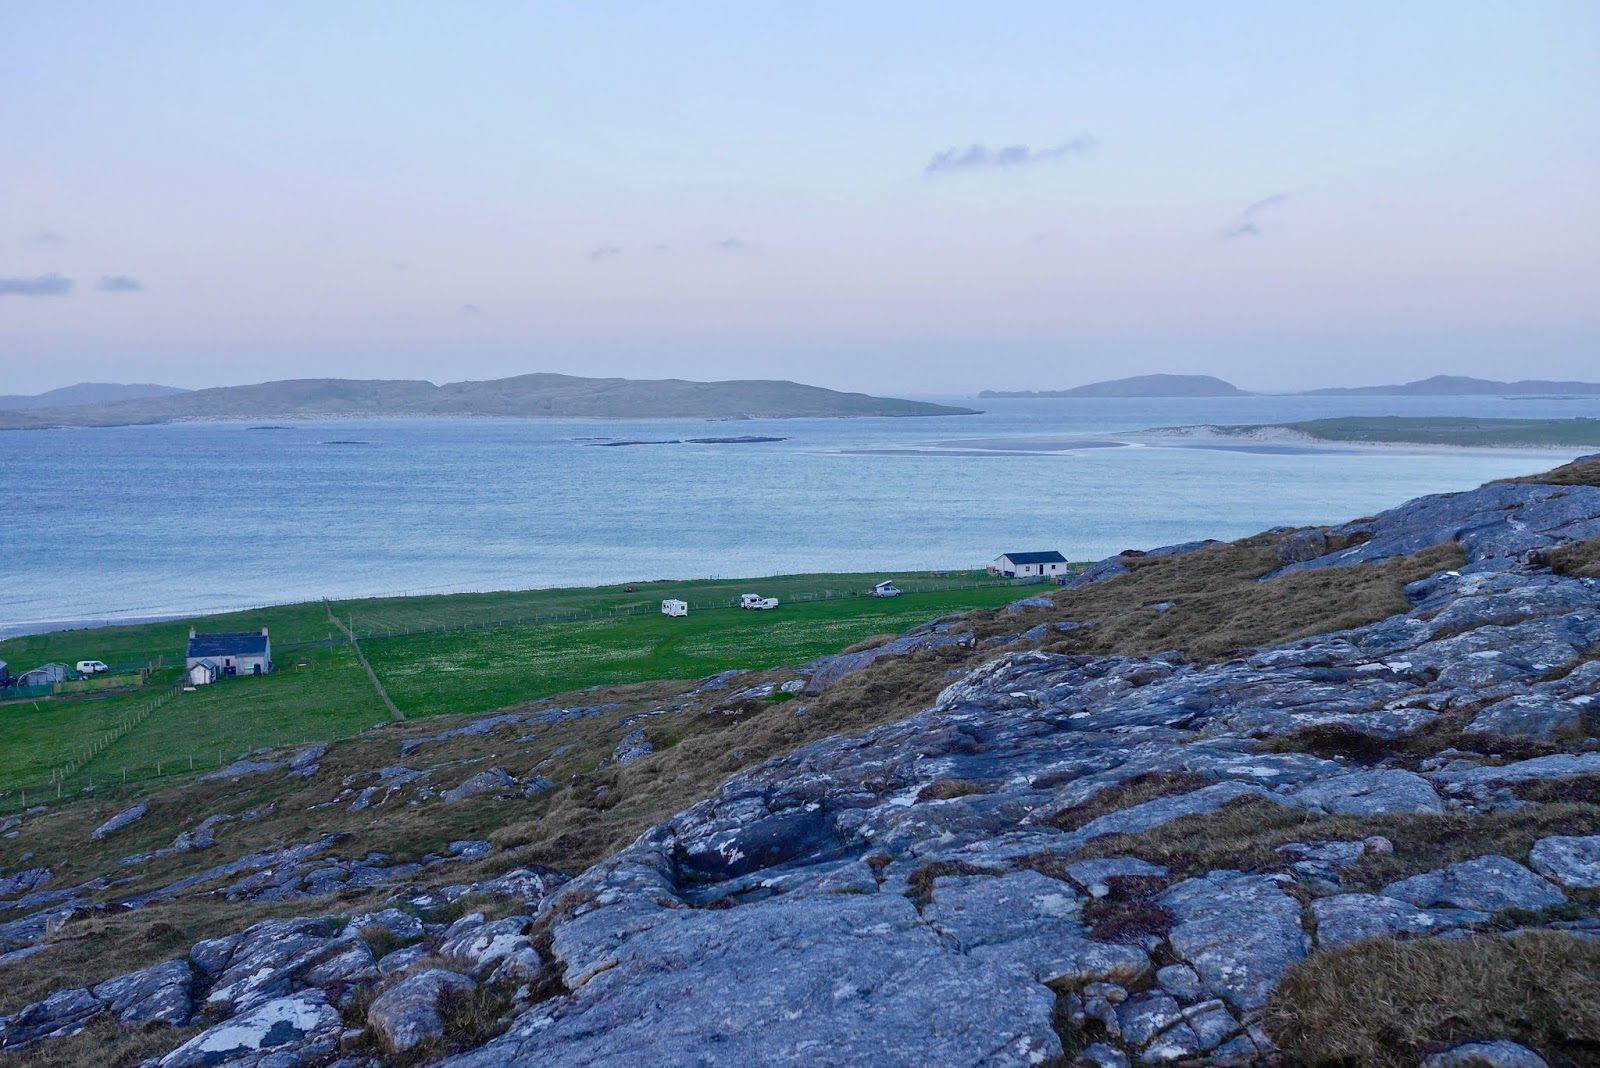 Camping in Barra, Campsites in scotland that allow fires